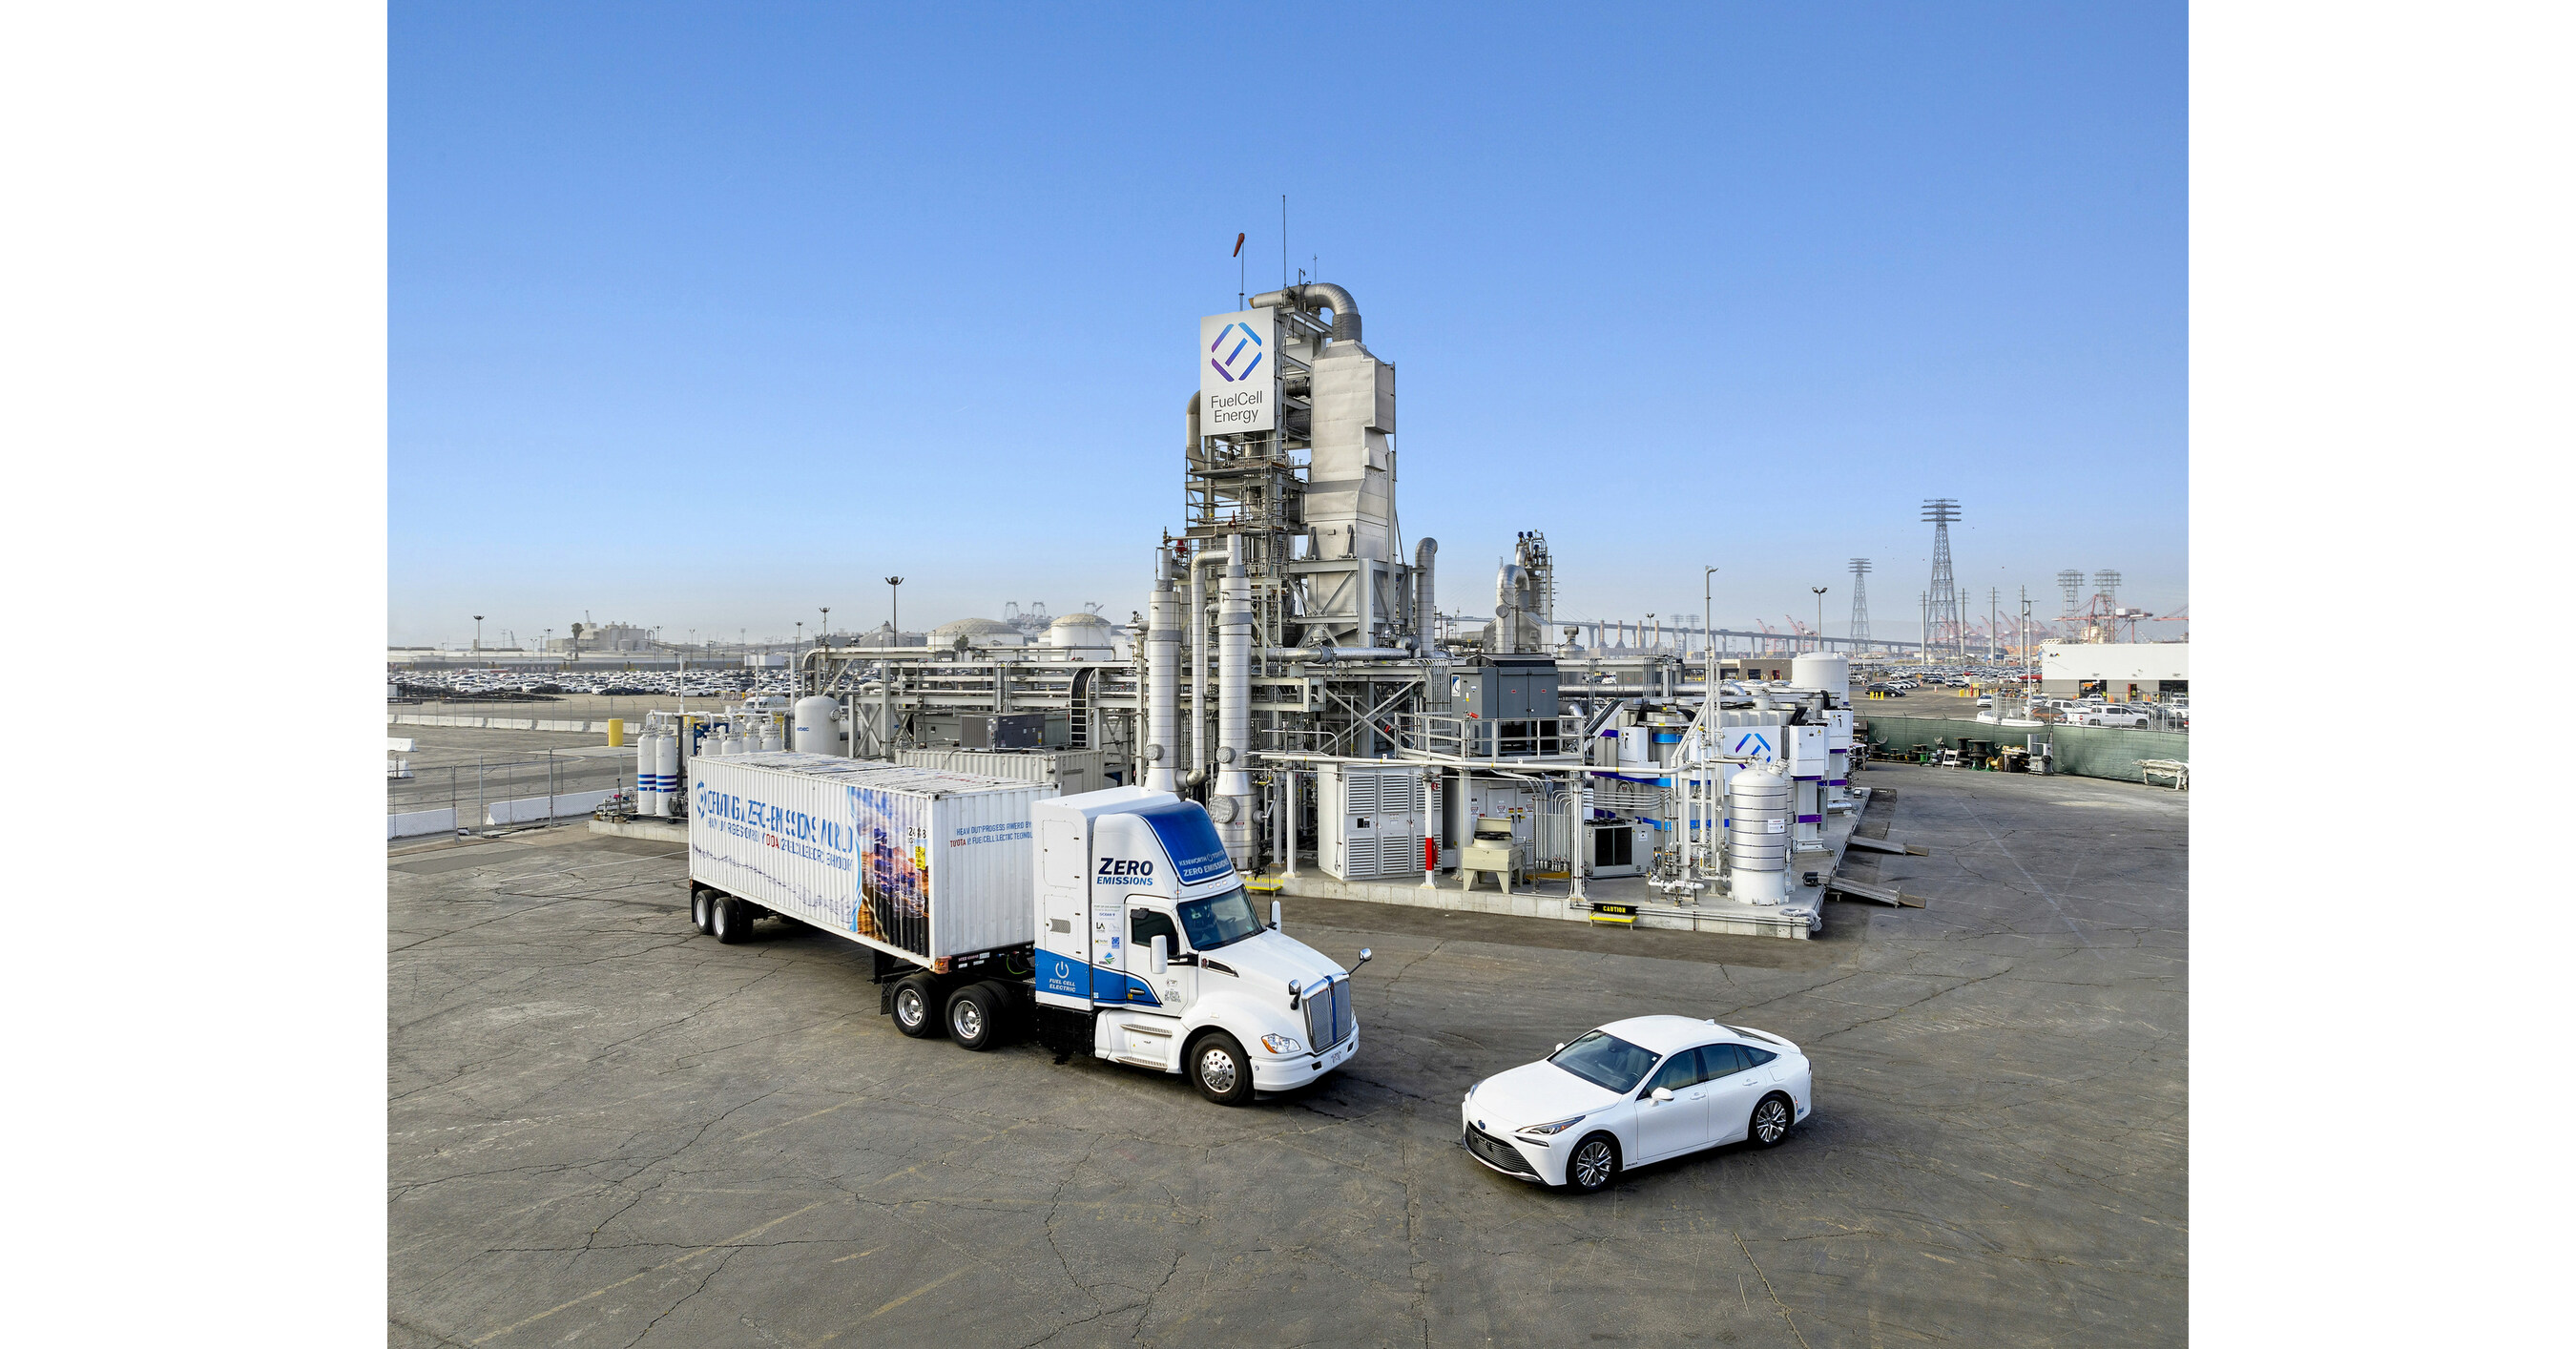 FuelCell Energy and Toyota Announce Completion of World’s First “Tri-gen” Production System